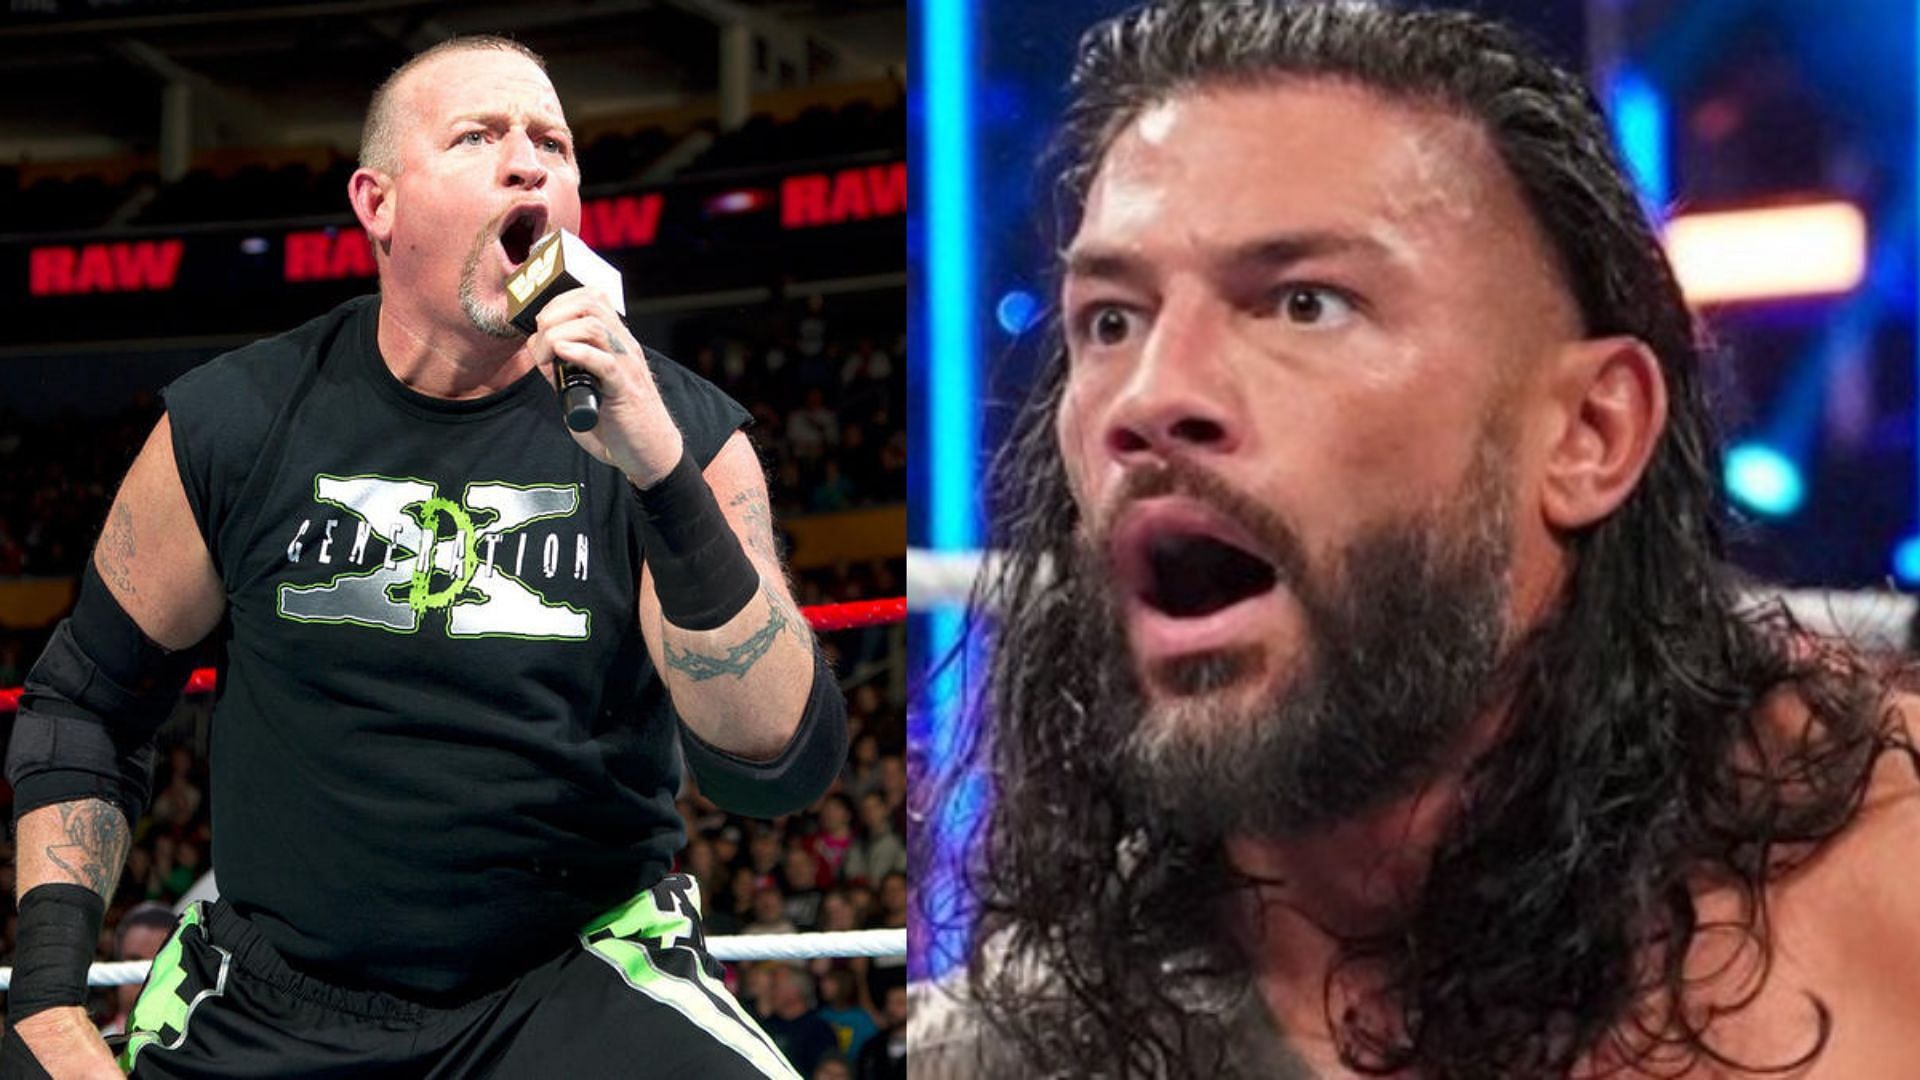 Road Dogg and Roman Reigns are associated with WWE